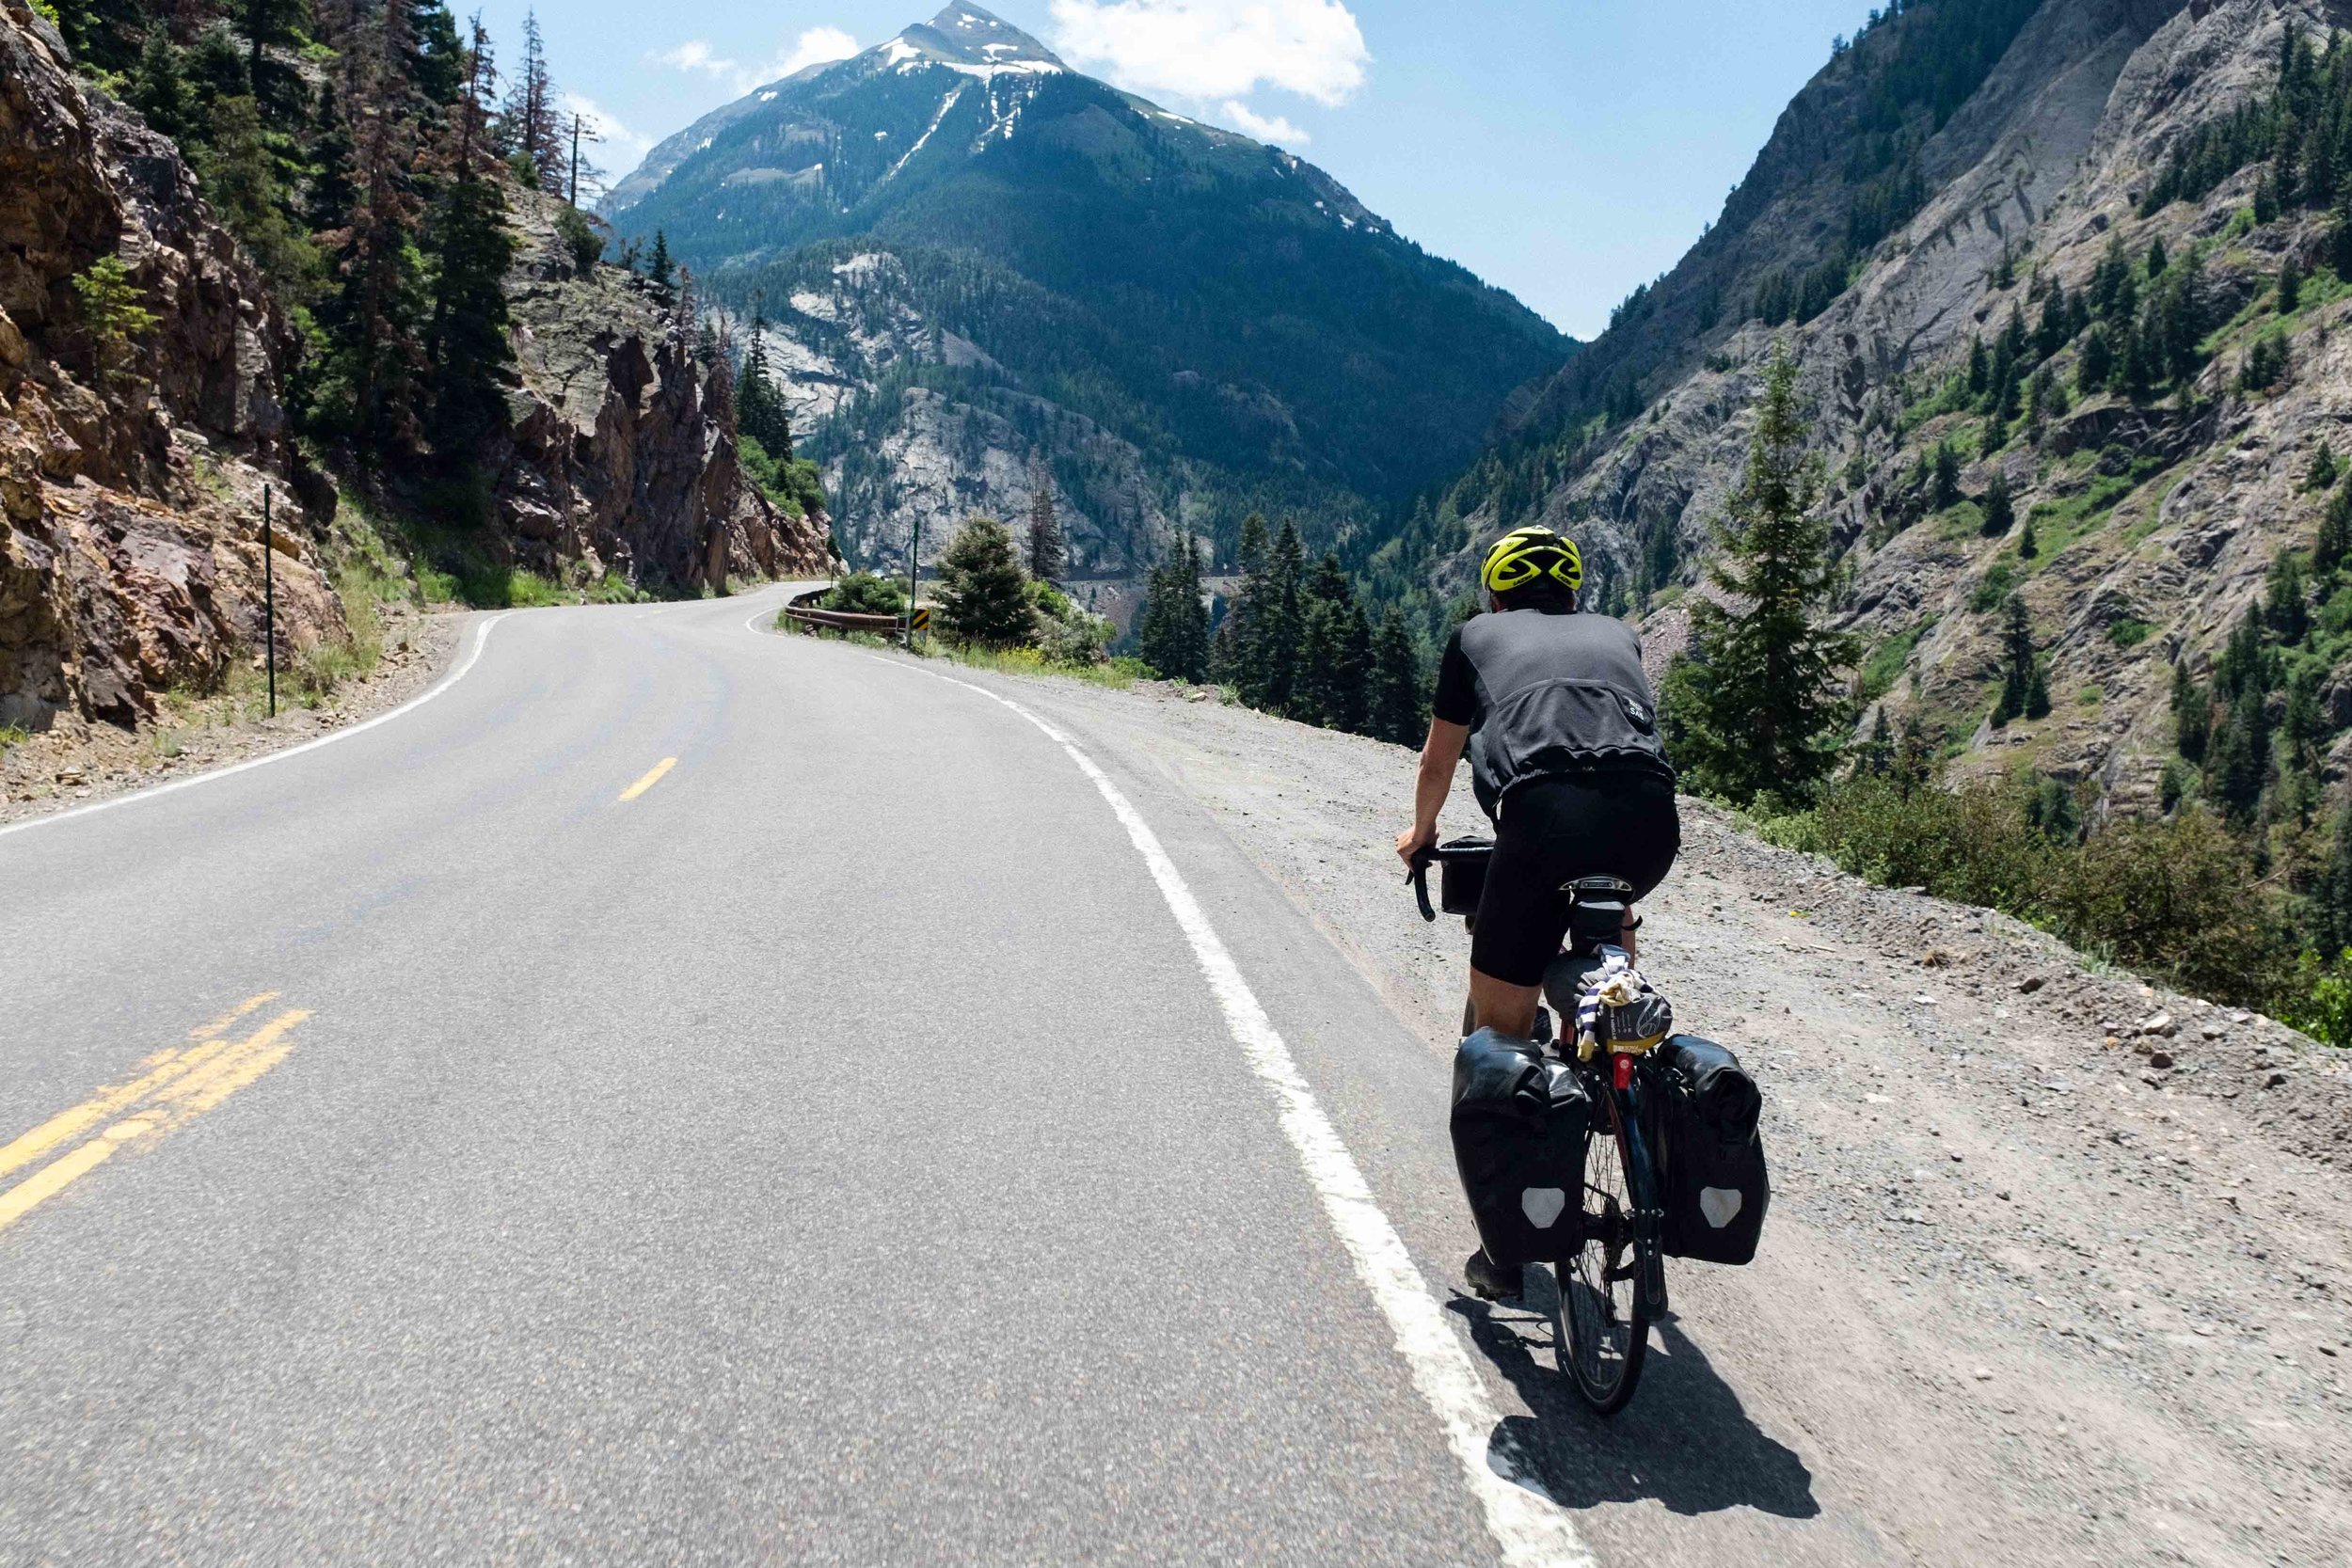 Ben just CRUISING up Red Mountain Pass. Consistent grades around 6% kept things fairly low key. But you can expect to take around 2 hours to make it to the top if you're on a fully loaded bike.